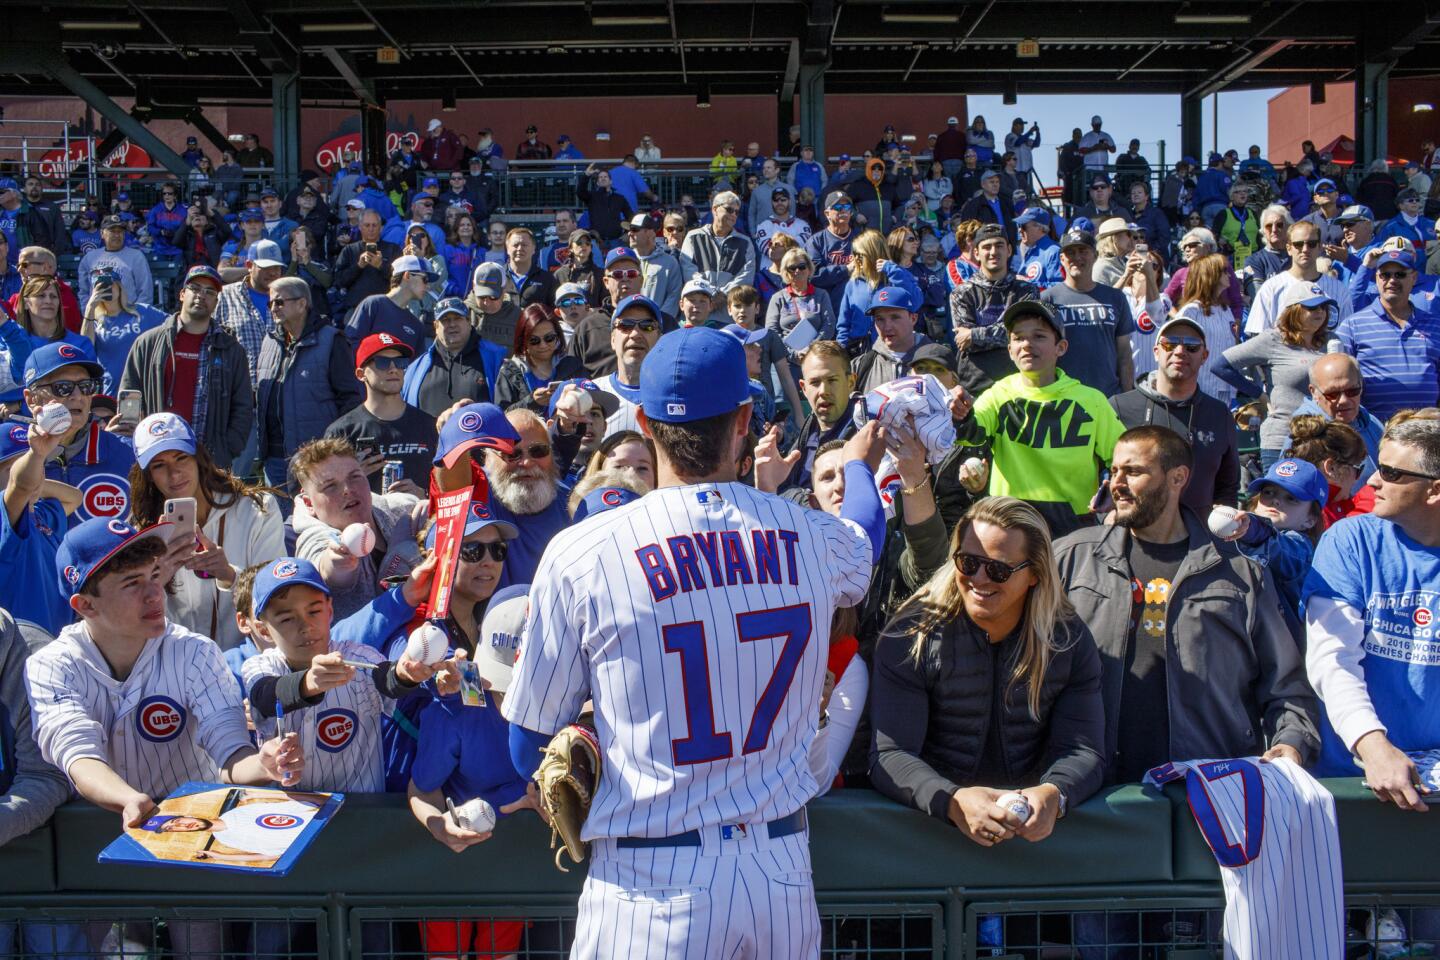 Kris Bryant signs autographs before a spring training game against the Brewers at Sloan Park in Mesa, Ariz., on Saturday Feb. 23, 2019.